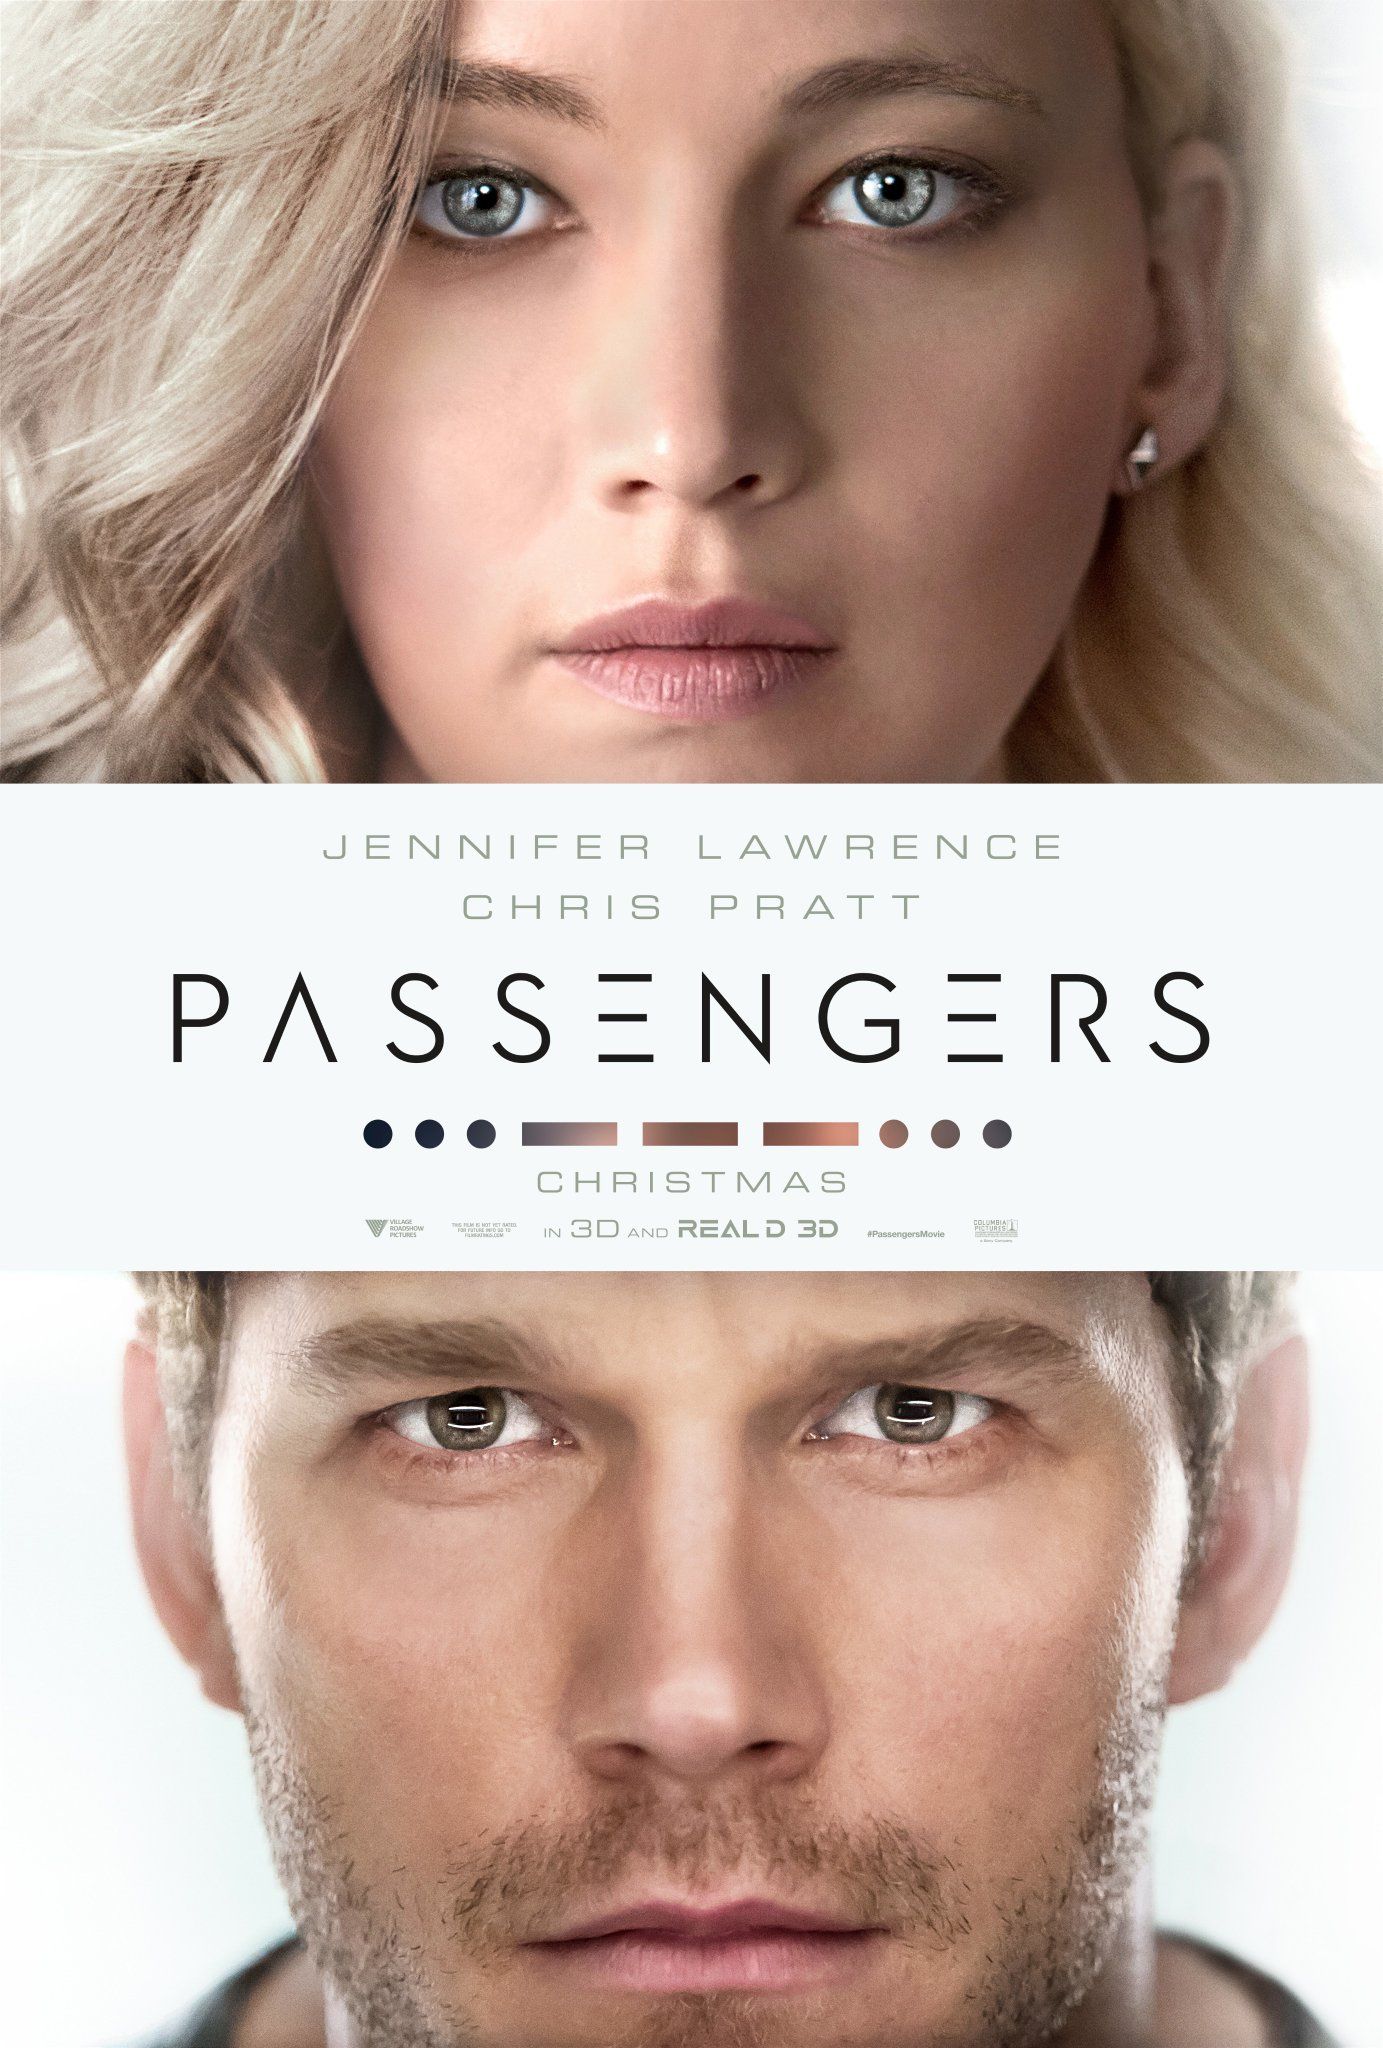 Let's Discuss The 'Passengers' Ending And How The Script Was